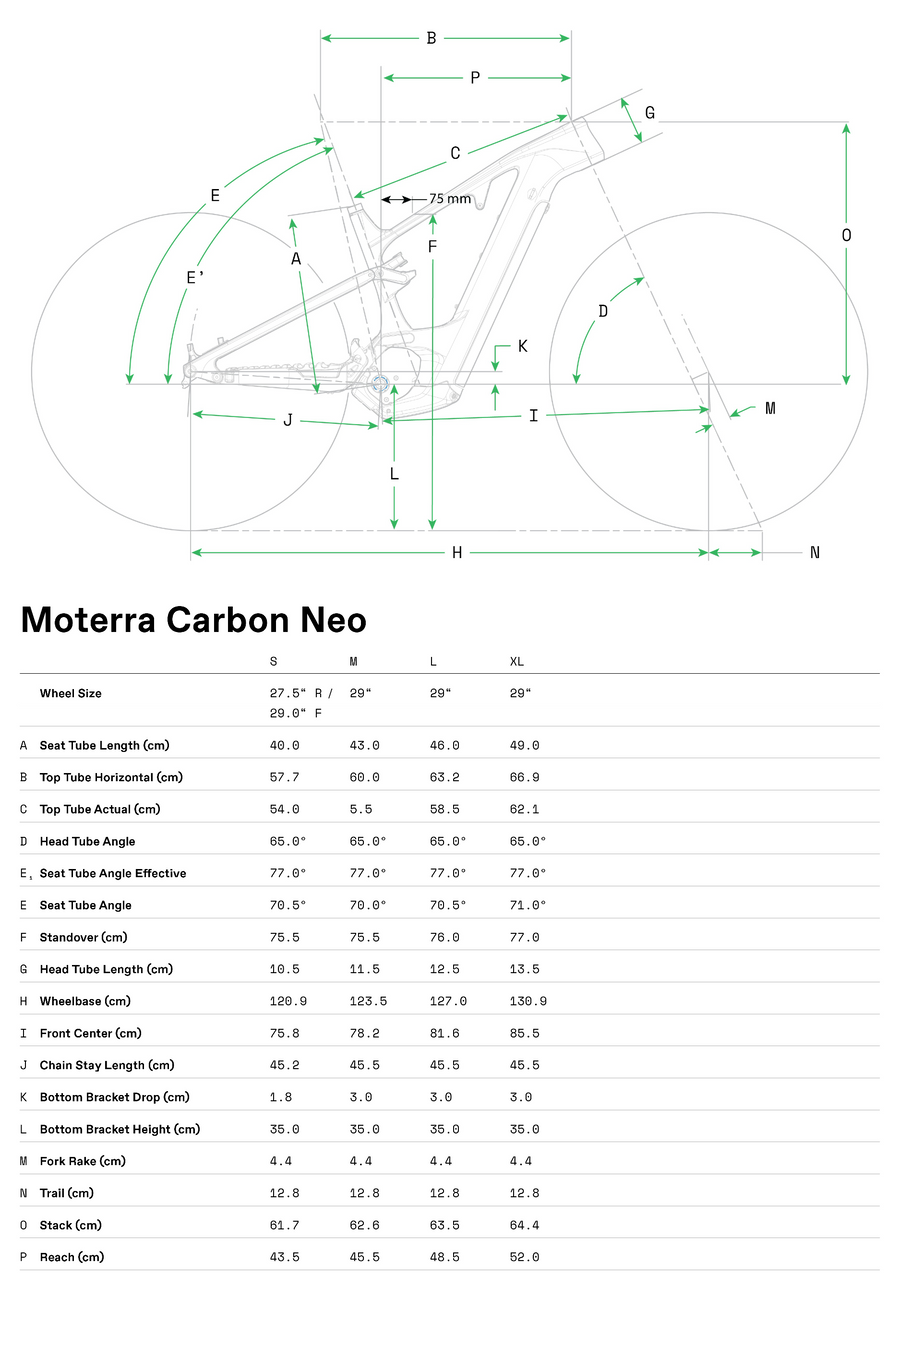 cannondale-moterra-neo-carbon-1-e-bike-abyss-bluecannondale-moterra-neo-carbon-2-e-mtb-bike-mantiscannondale-moterra-neo-carbon-2-e-mtb-bike-highlighter-pre-order